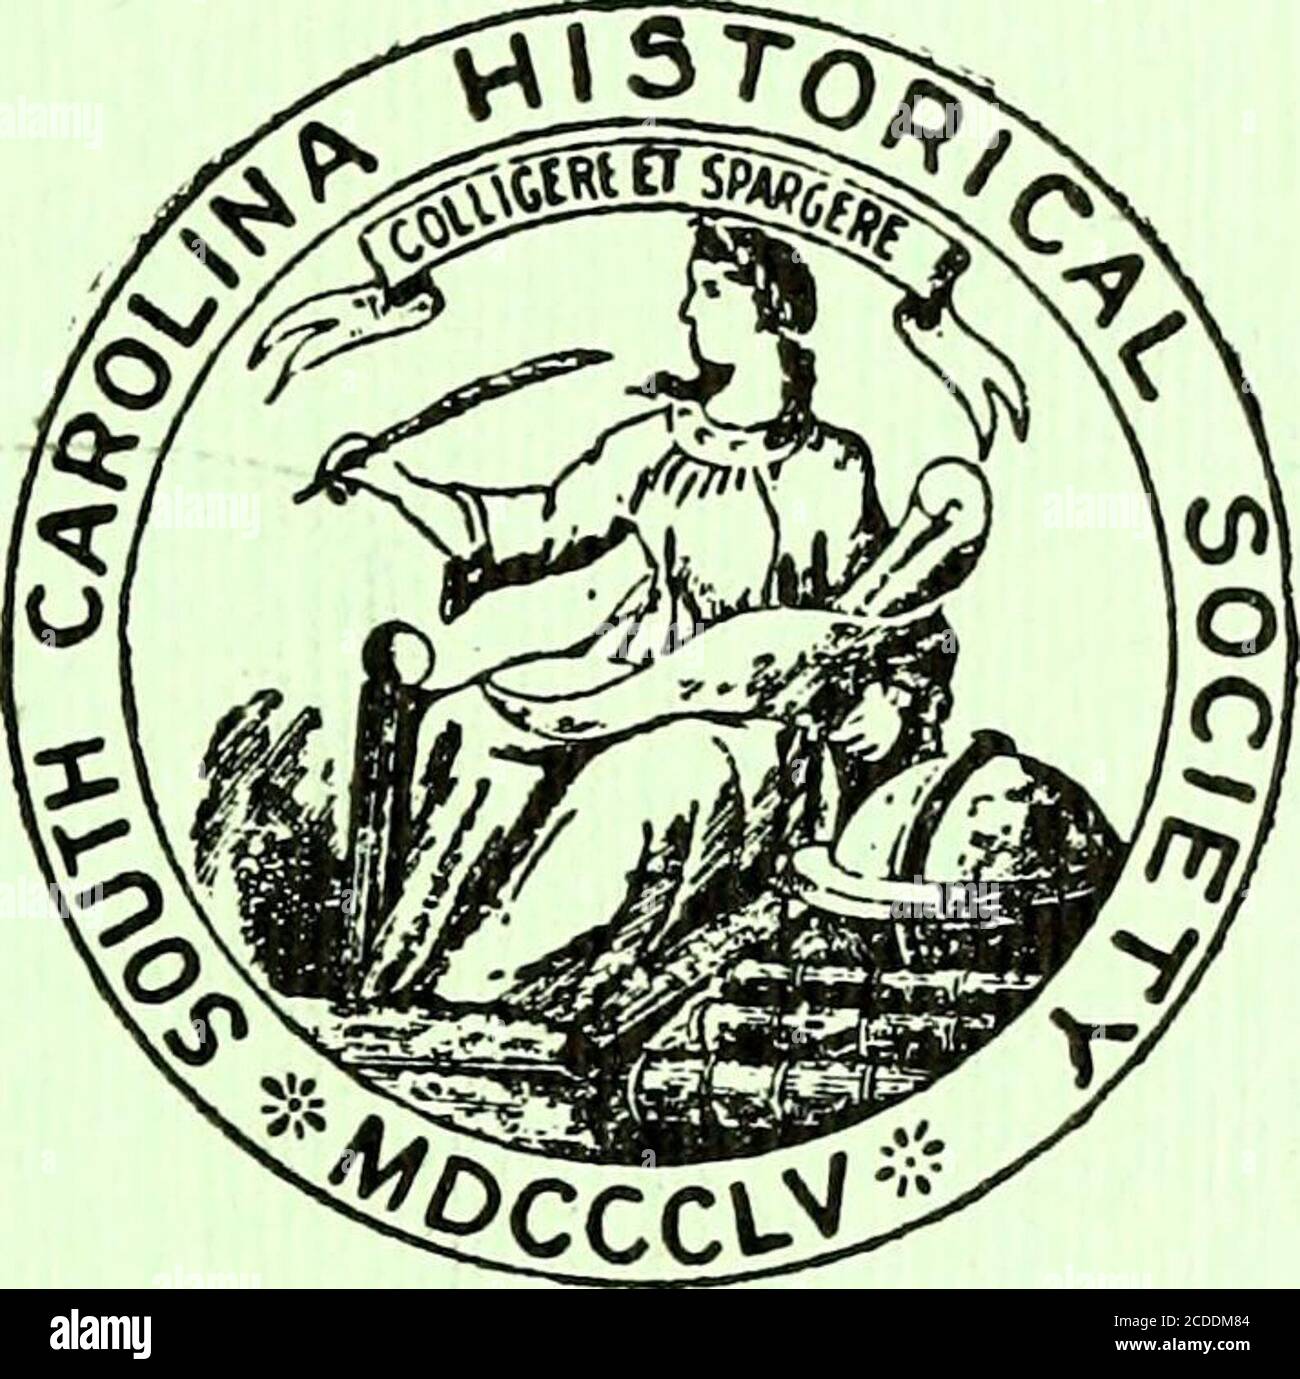 . The South Carolina historical and genealogical magazine . at Day break, to order the Tents up. (To be continued) LIST OF PUBLICATIONS OF THE SOUTH CAROLINA HISTORICAL SOCIETY COLLECTIONS Vol. I, 1857, $3.00; Vol. II, 1858, $3.00; Vol. Ill, 1859,out of print. Vol. IV, 1887, unbound, $3.00, bound, $4.00;Vol. V, 1897, paper, $3 00. PAMPHLETS Journal of a Voyage to Charlestown in So. Carolina byPelatiah Webster in 1765. Edited by Prof. T. P. Harrison,1898. 75c. The History of the Santee Canal. By Prof. F. A.Porcher. With an Appendix by A. S. Salley, Jr., 1903. 75c. THE SOUTH CAROLINA HISTORICAL Stock Photo